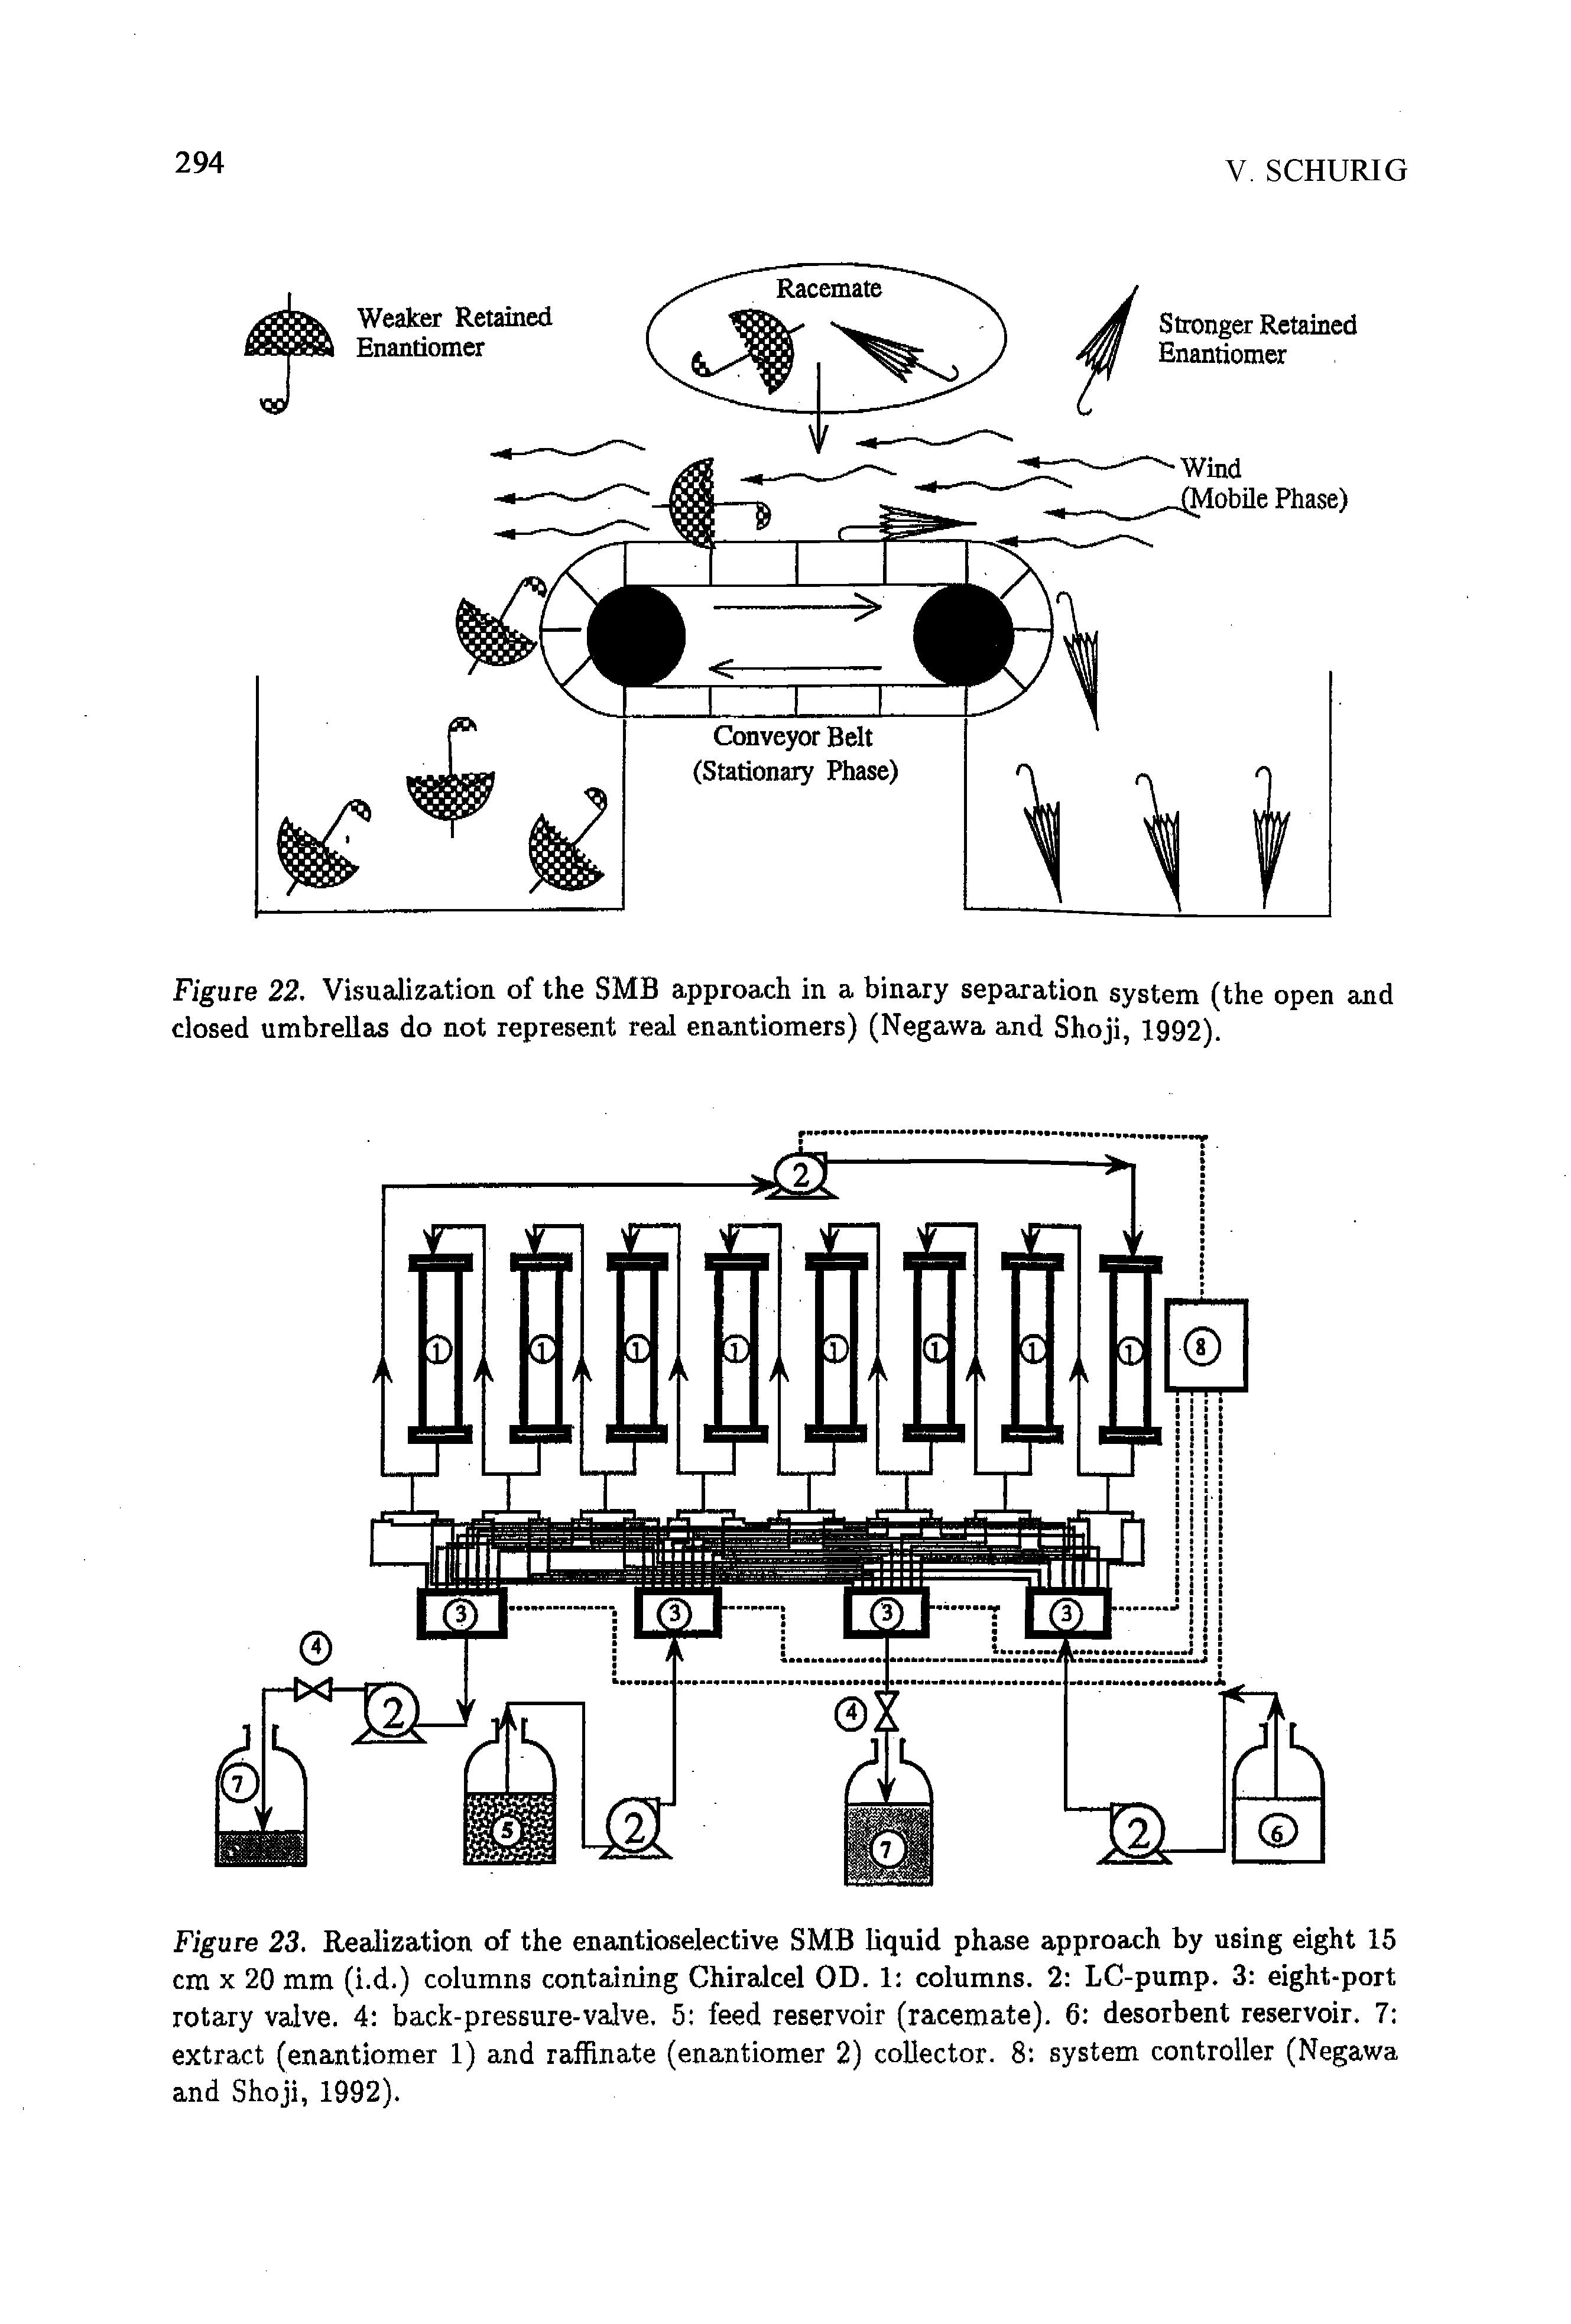 Figure 22. Visualization of the SMB approach in a binary separation system (the open and closed umbrellas do not represent real enantiomers) (Negawa and Shoji, 1992).